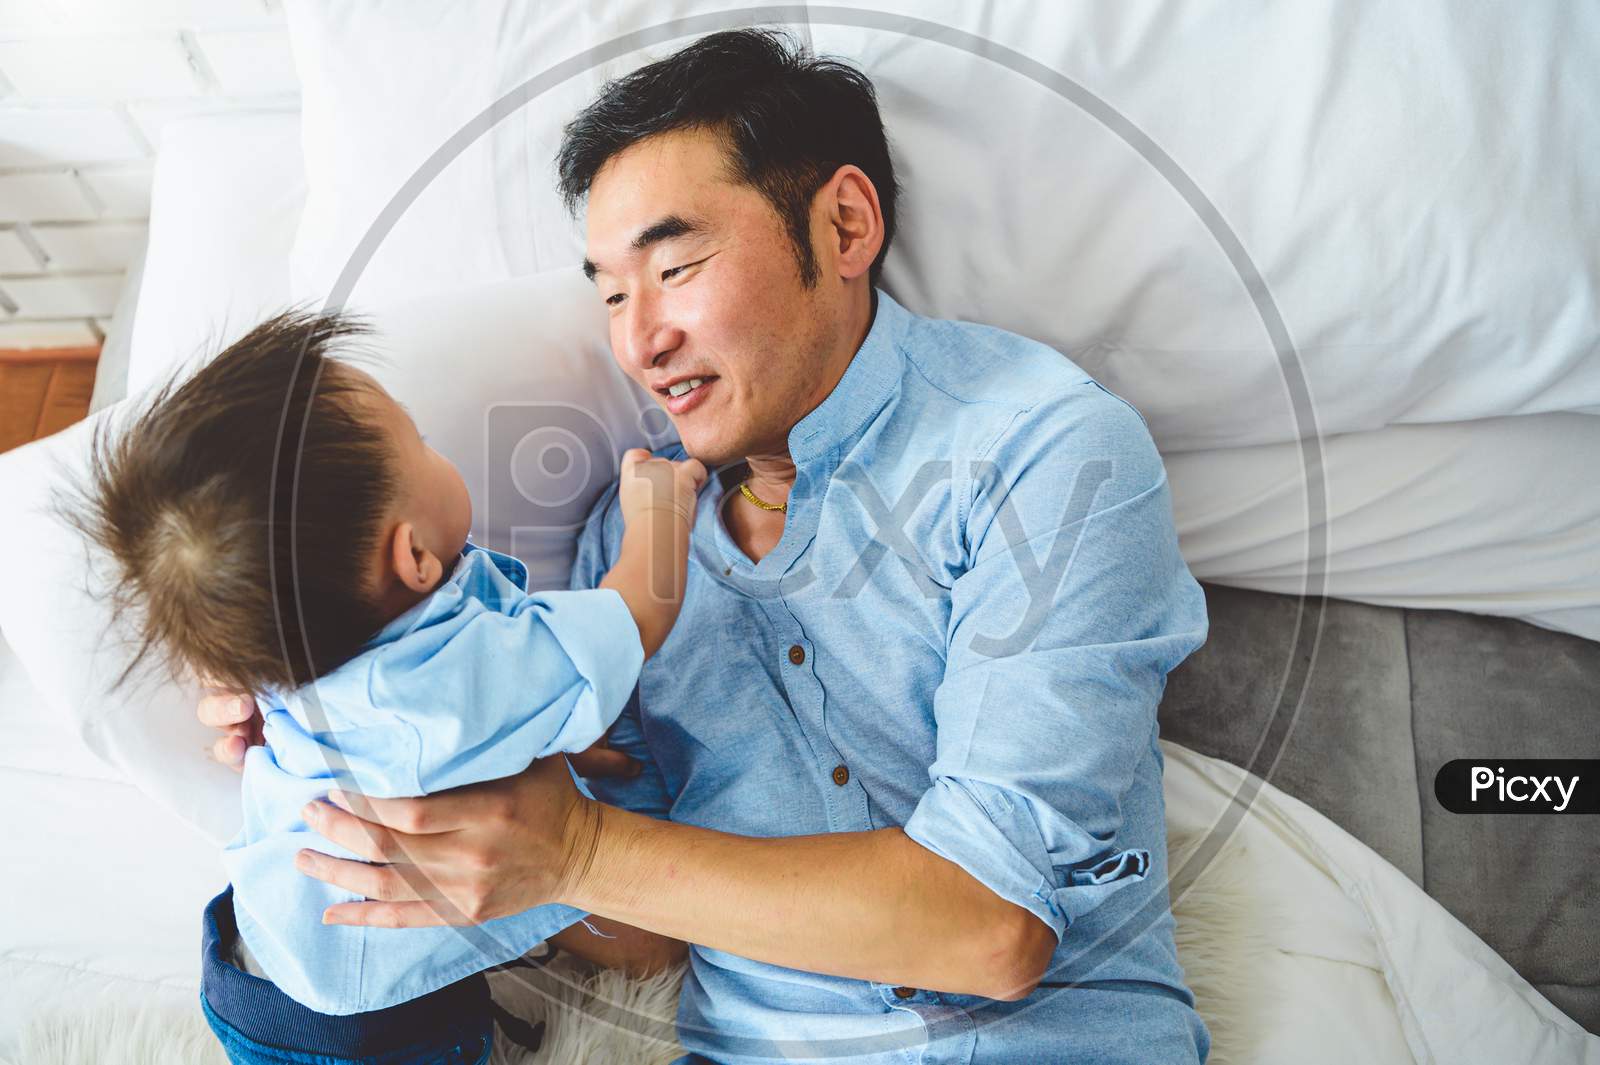 Asian Father And Son Playing Together On White Bed In Bedroom In The Morning. Two People Having Leisure Time At Home. People Lifestyle Concept.